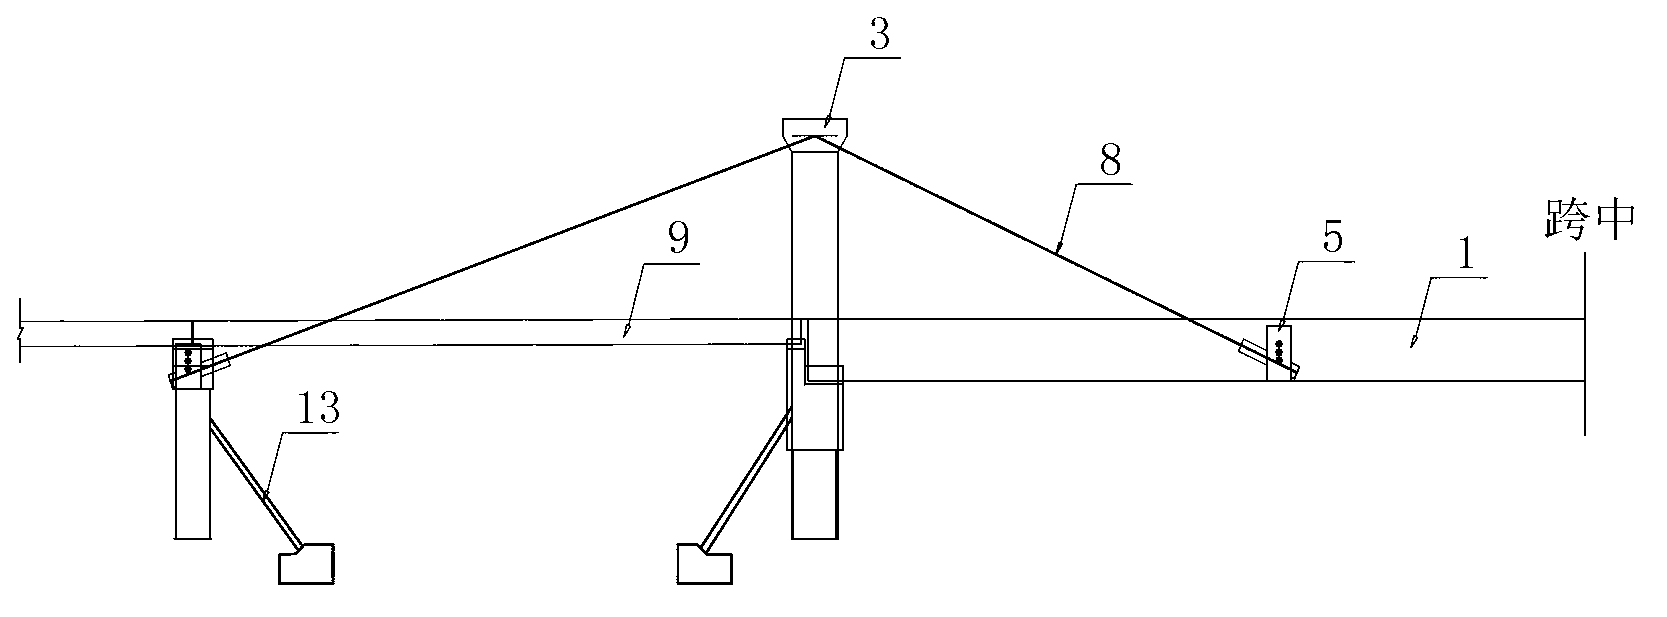 Simply-supported box girder bridge strengthening method with oblique cables